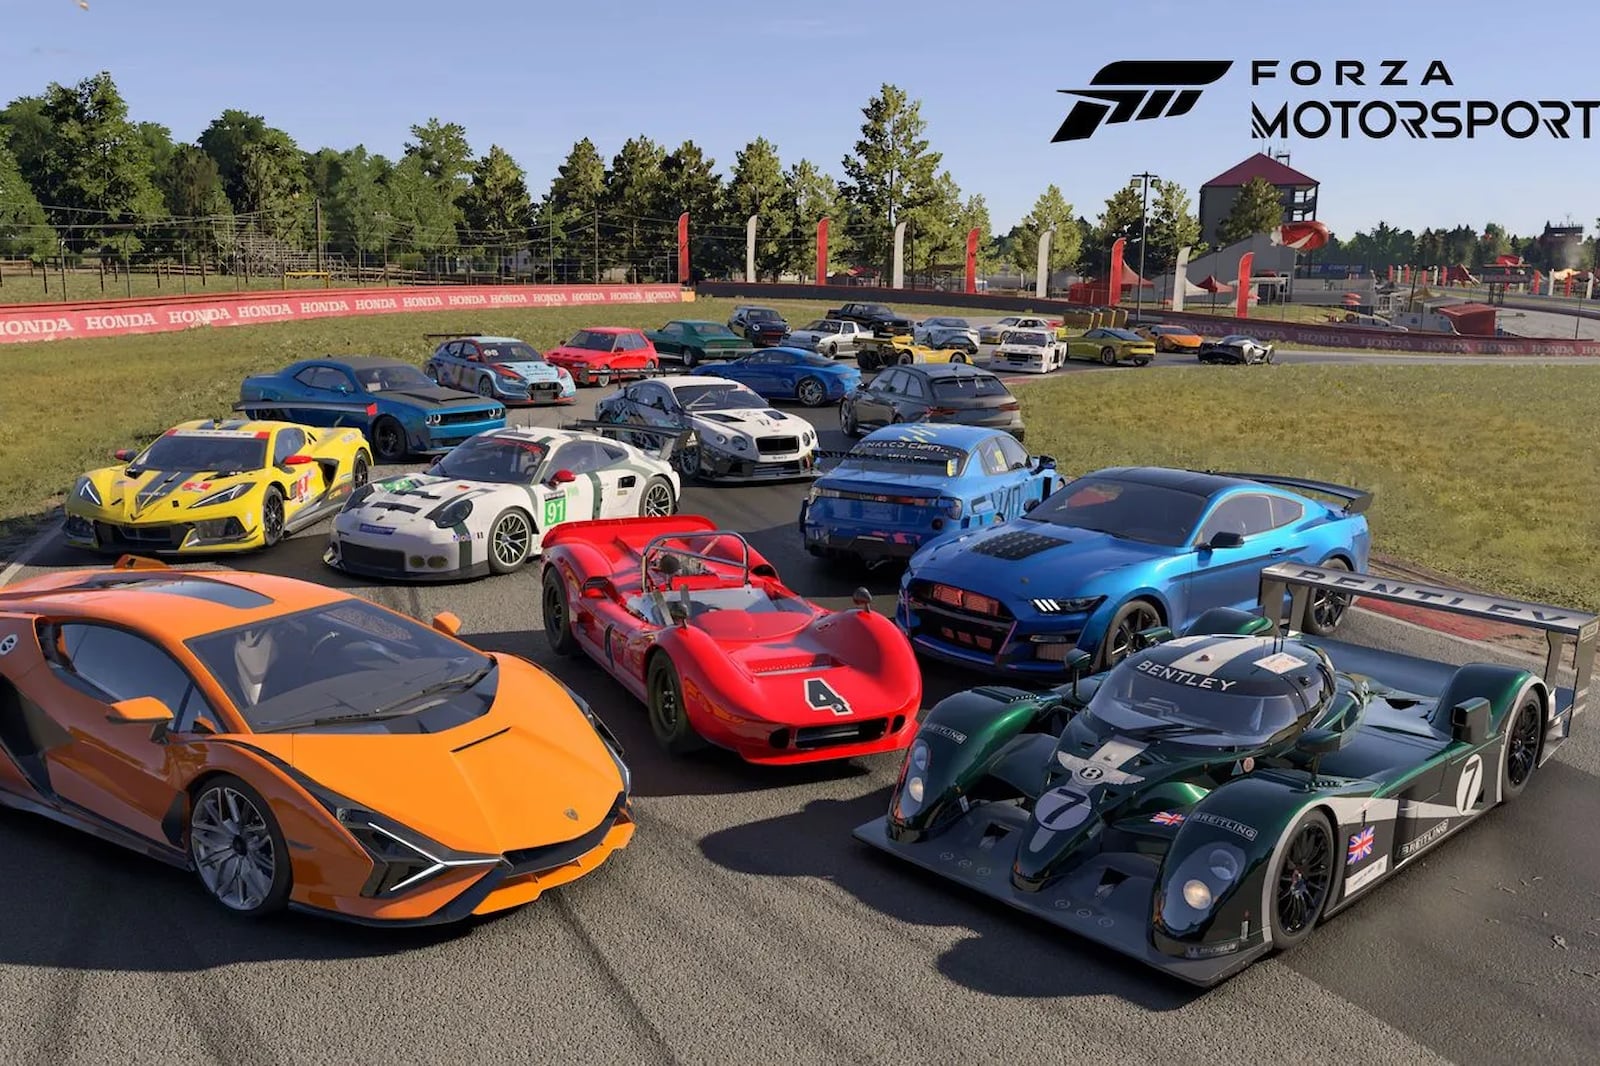 Forza Motorsport October Release Date Reportedly Revealed